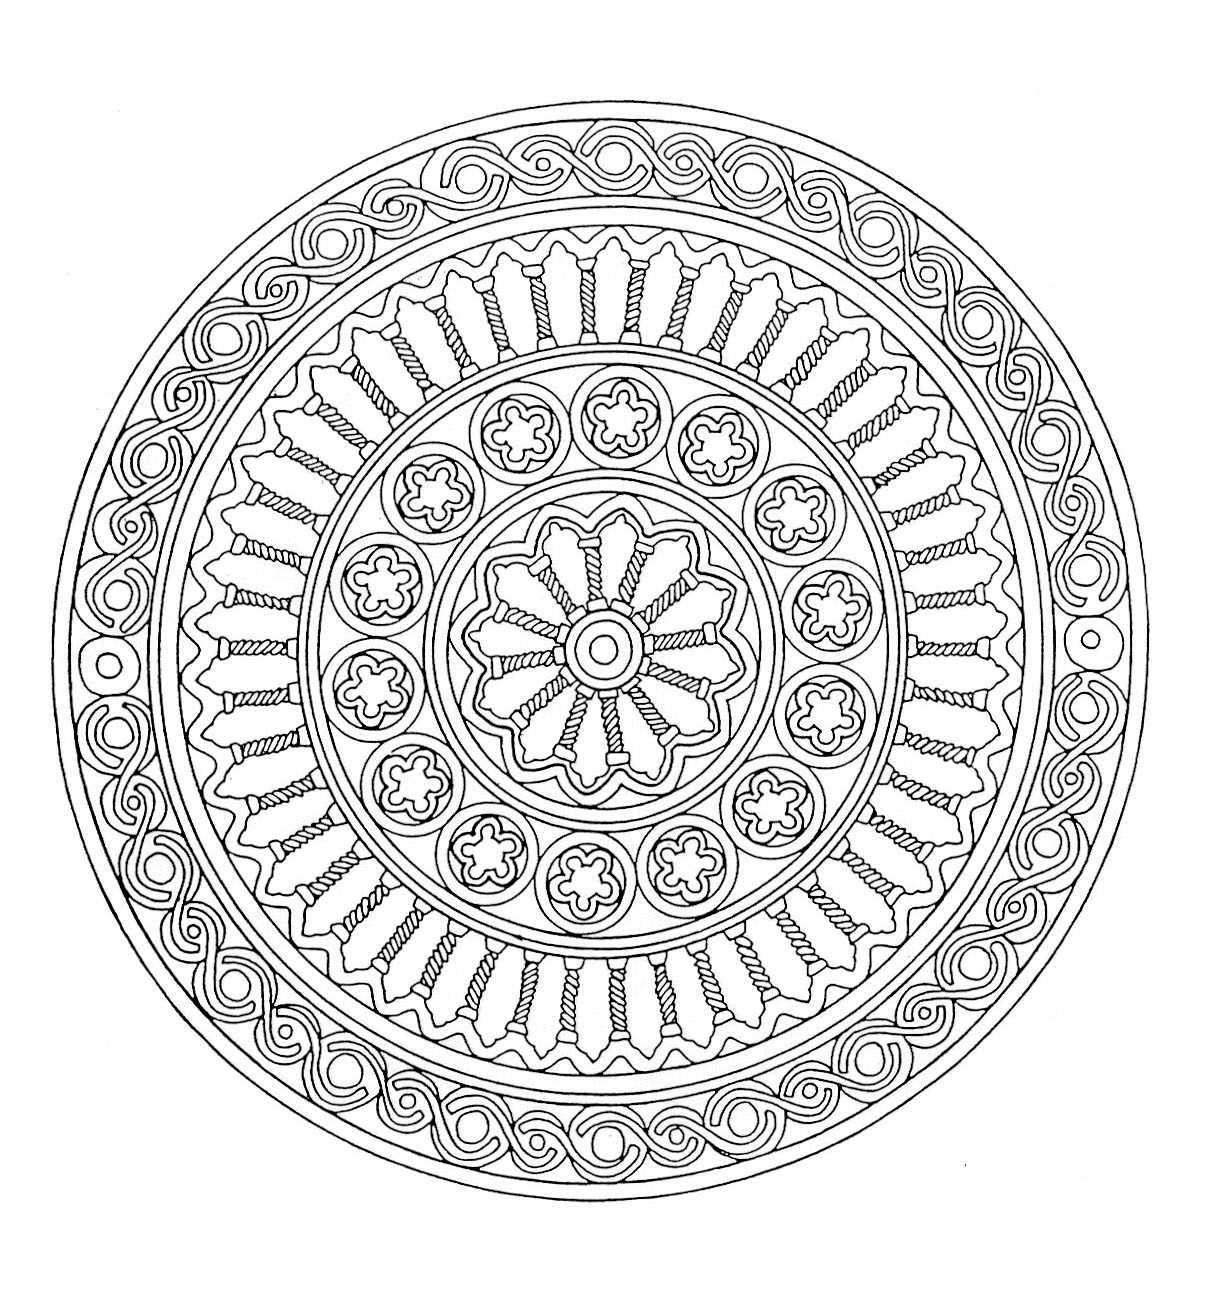 Is the Greece served as inspiration for this Mandala? In any case it seems there is columns of temples in this coloring page. See for yourself ... and color !